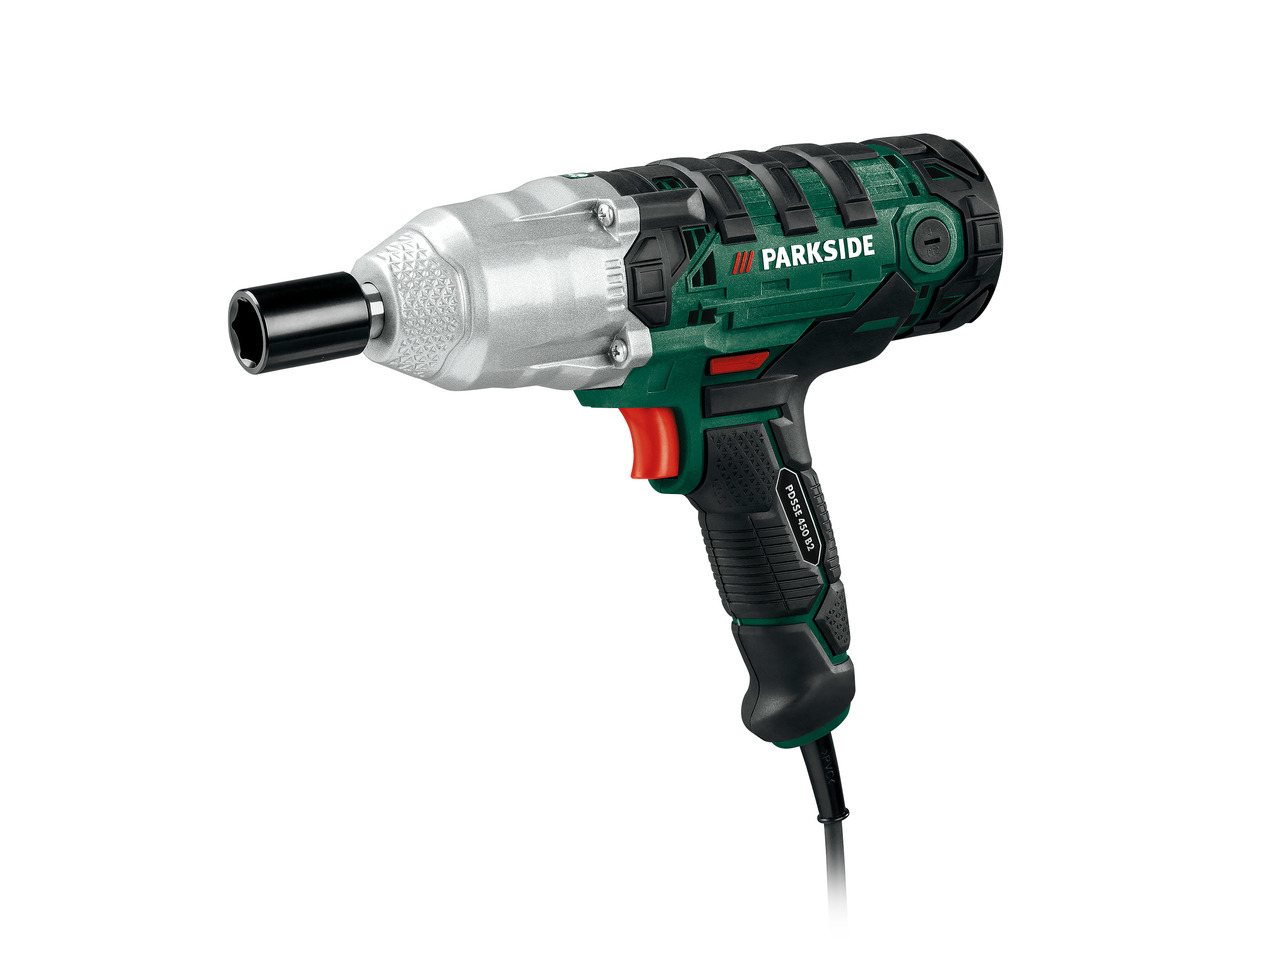 Parkside Electric Impact Wrench1